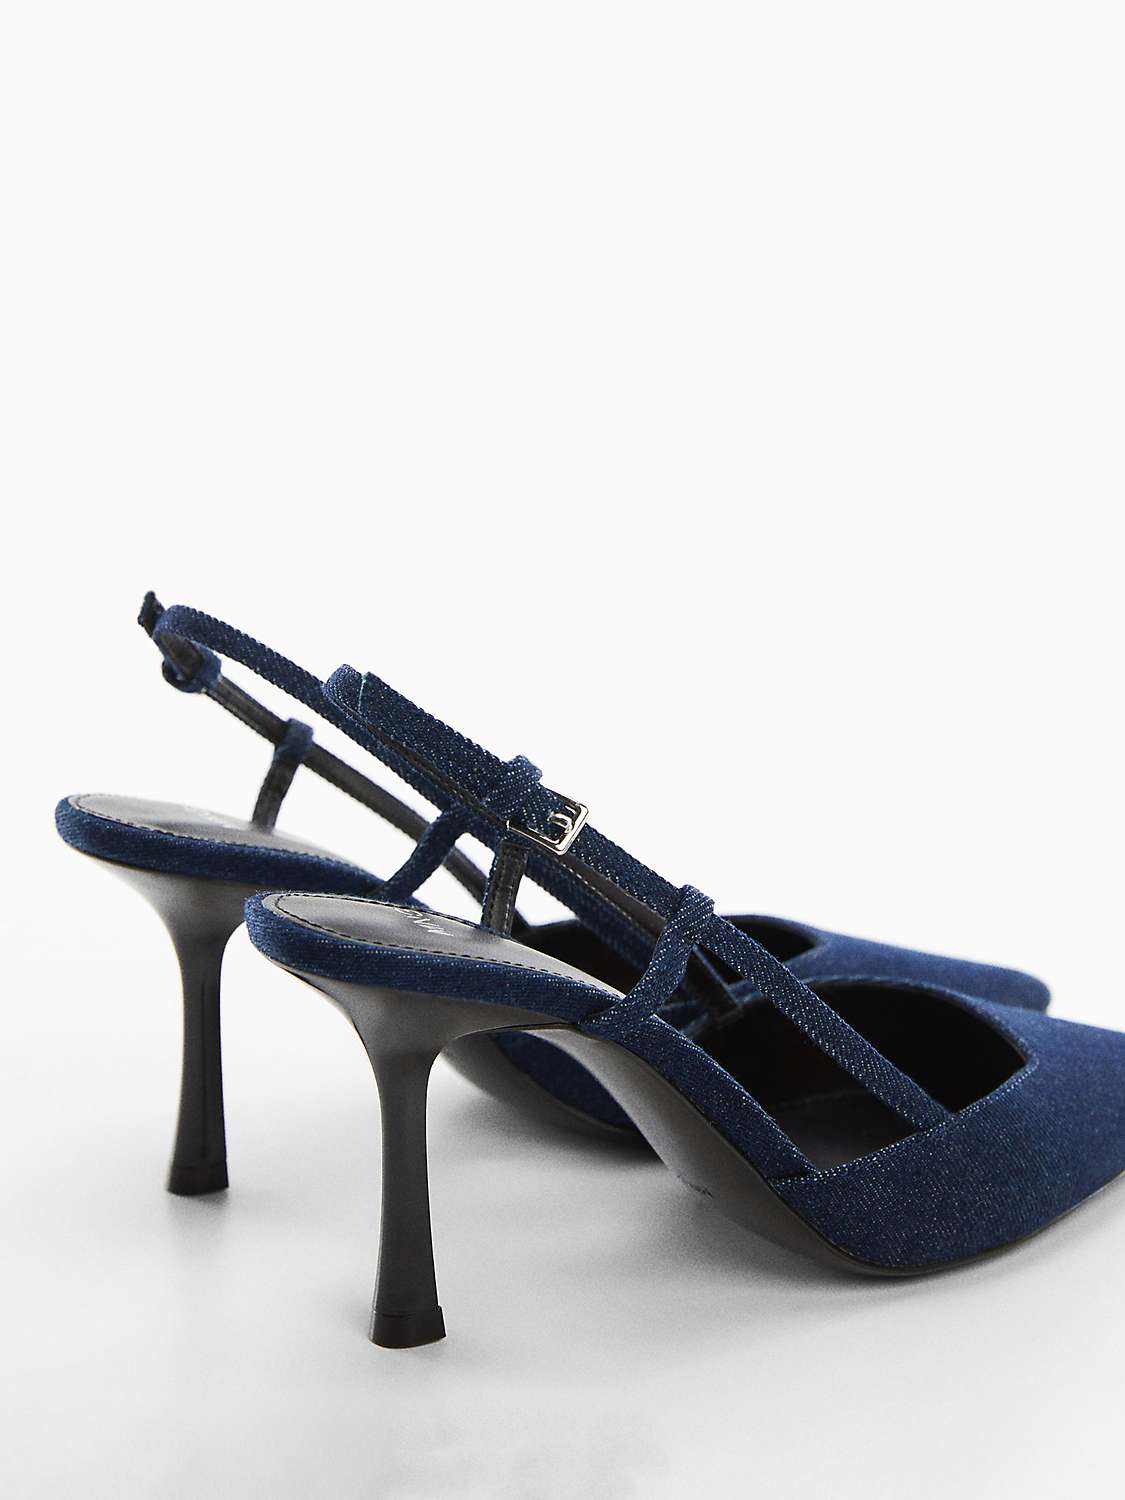 Mango Loande Pointed Court Shoes, Open Blue at John Lewis & Partners